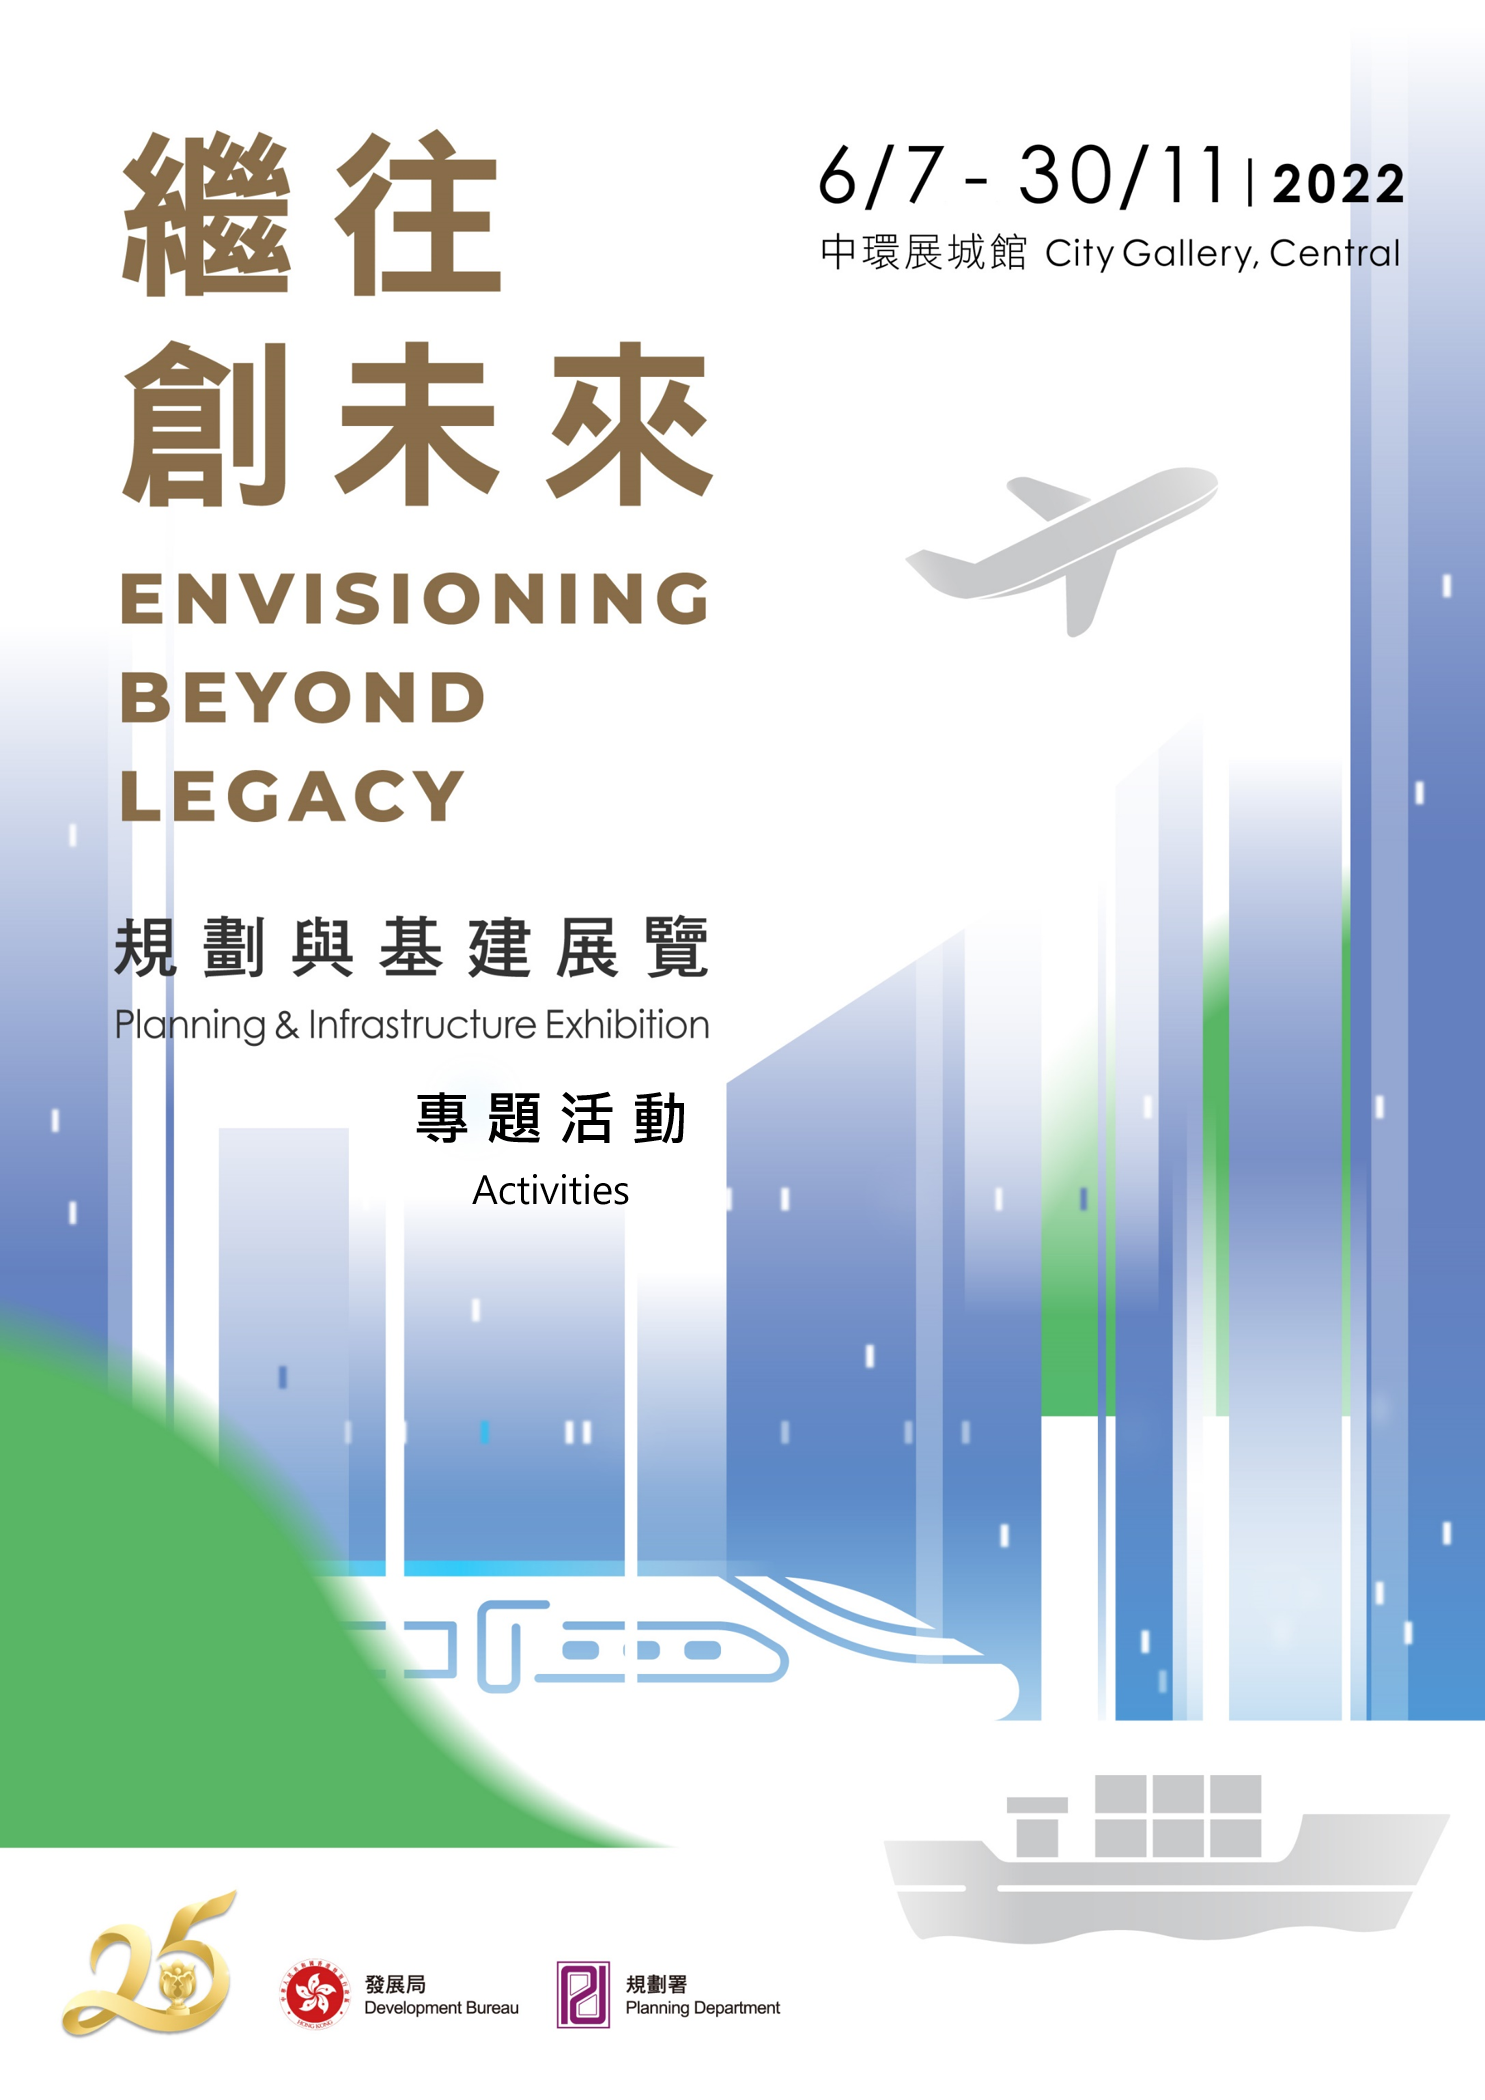 Envisioning Beyond Legacy Exhibition – Activities